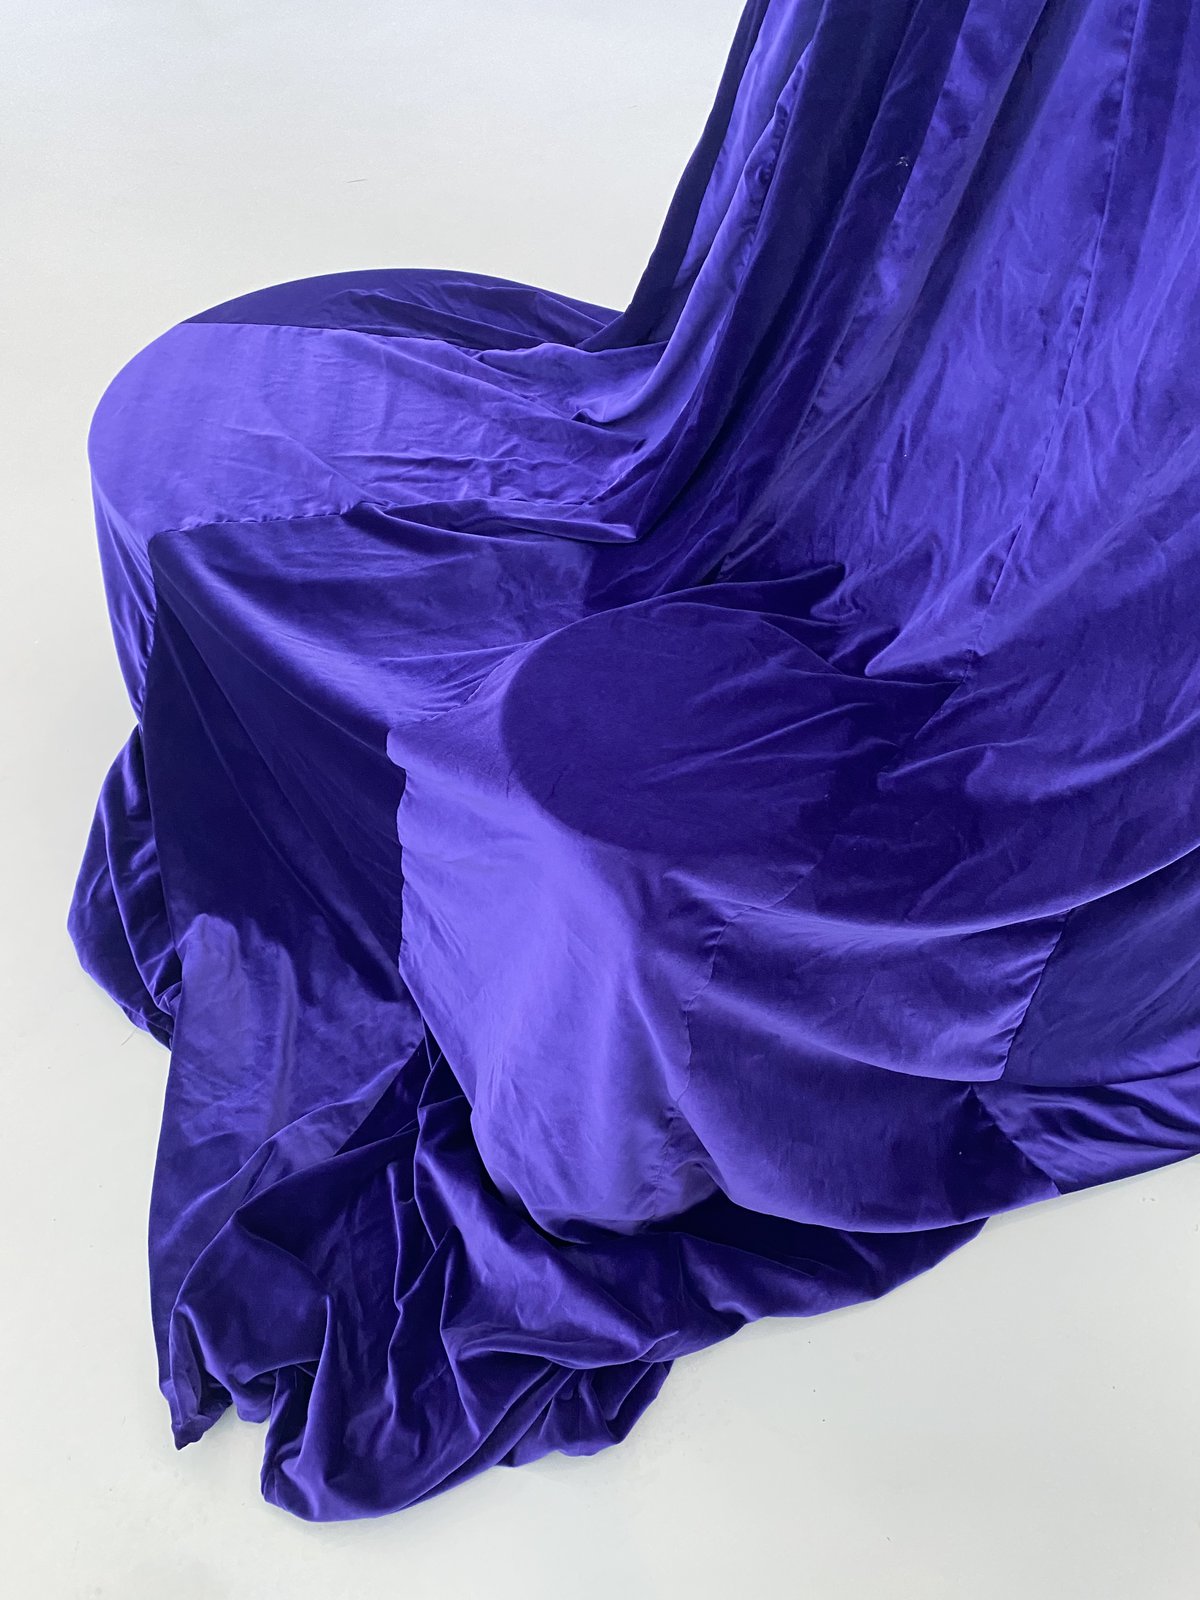 Anna-Sophie BergerCloak, 2021velvet, tripod and viariable hardwaredimensions variableDetail view